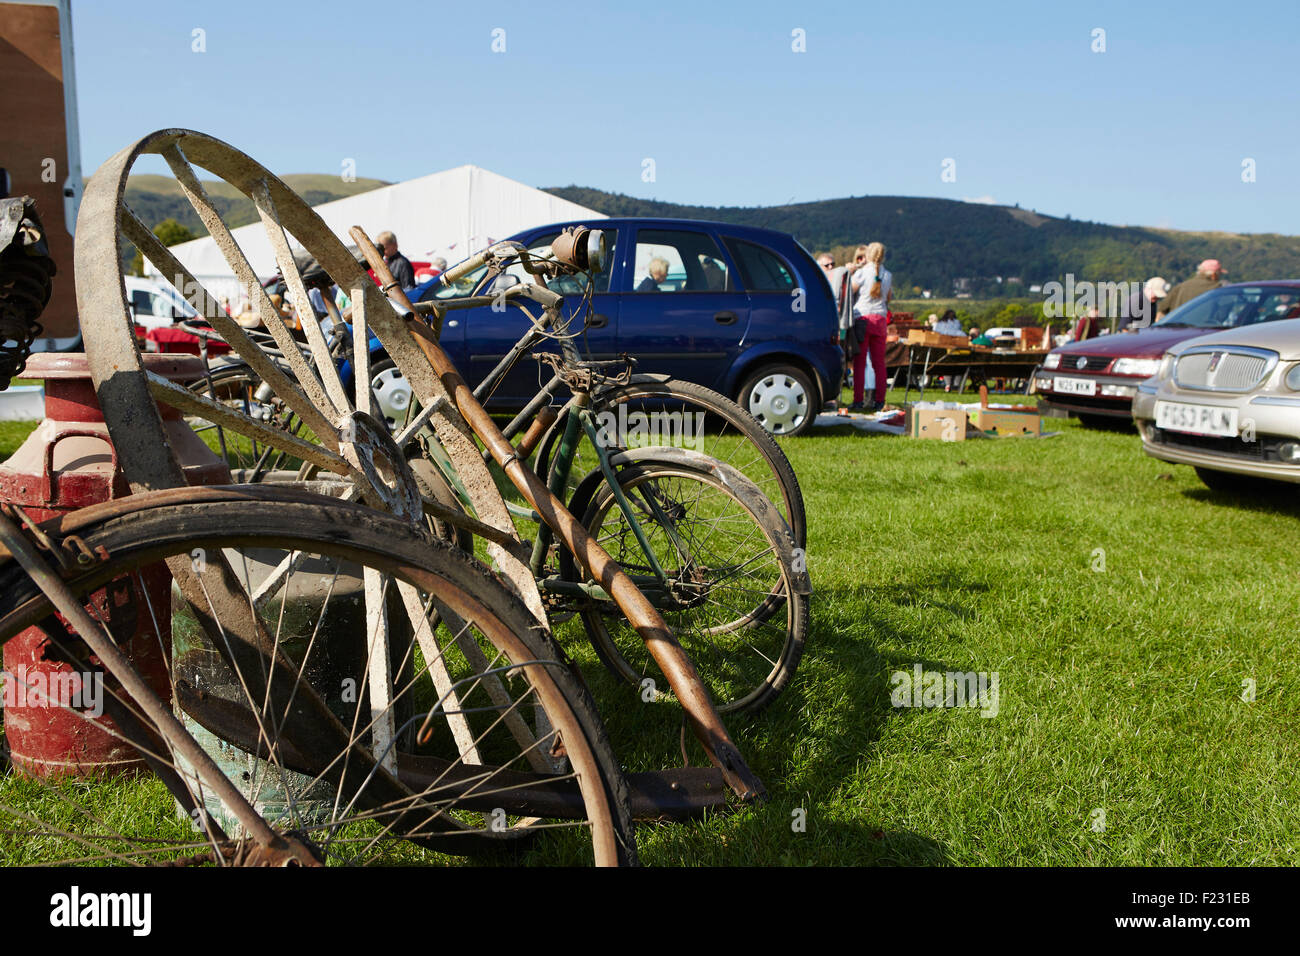 Selection of vintage bicycles, wheel rim and an old milk churn for sale at a flea market event. Stock Photo